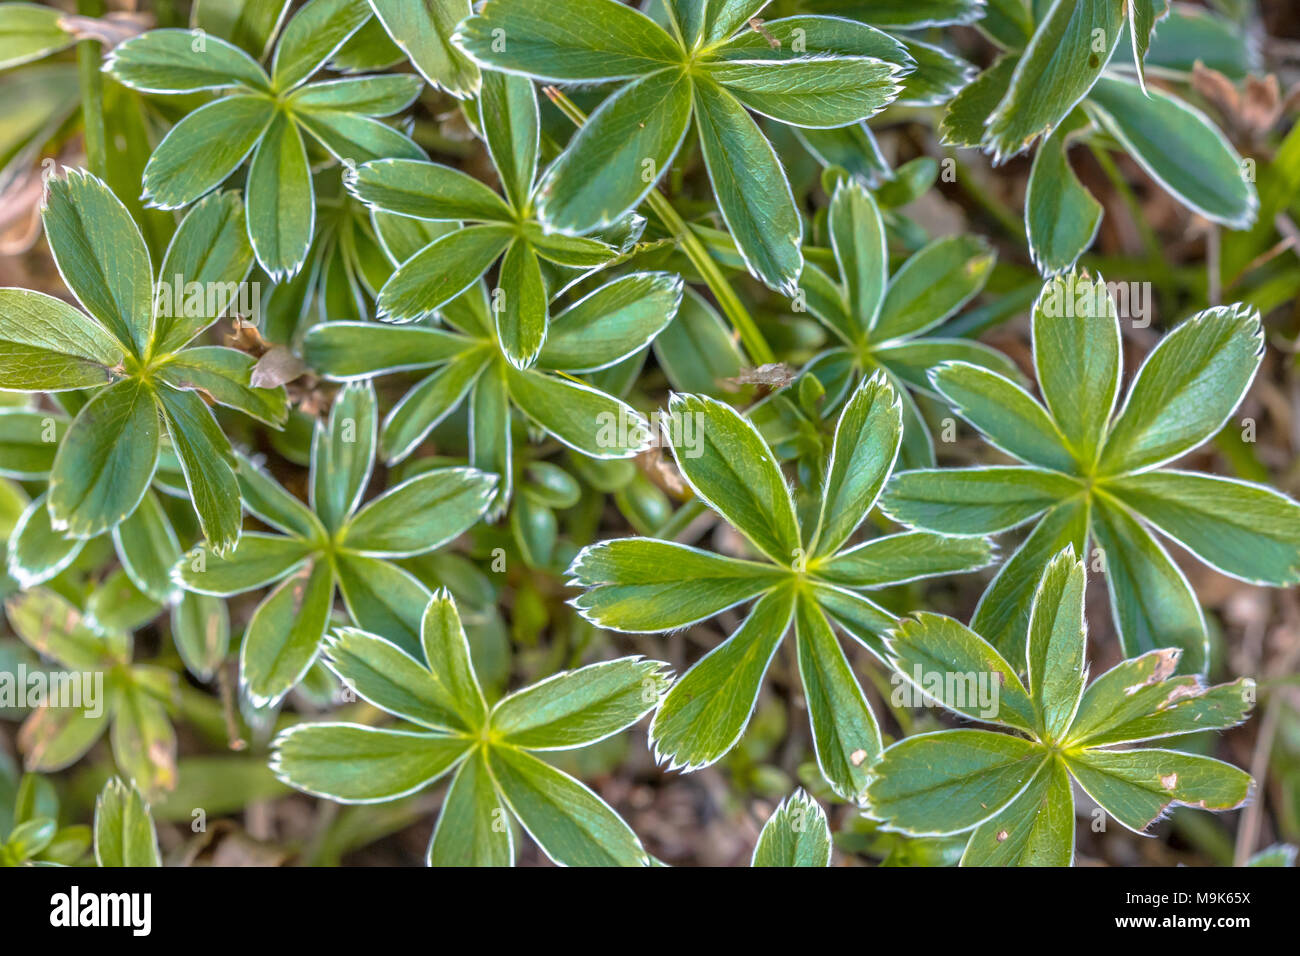 Alpine lady's-mantle (Alchemilla alpina) star shaped leaves in pattern as wallpaper Stock Photo